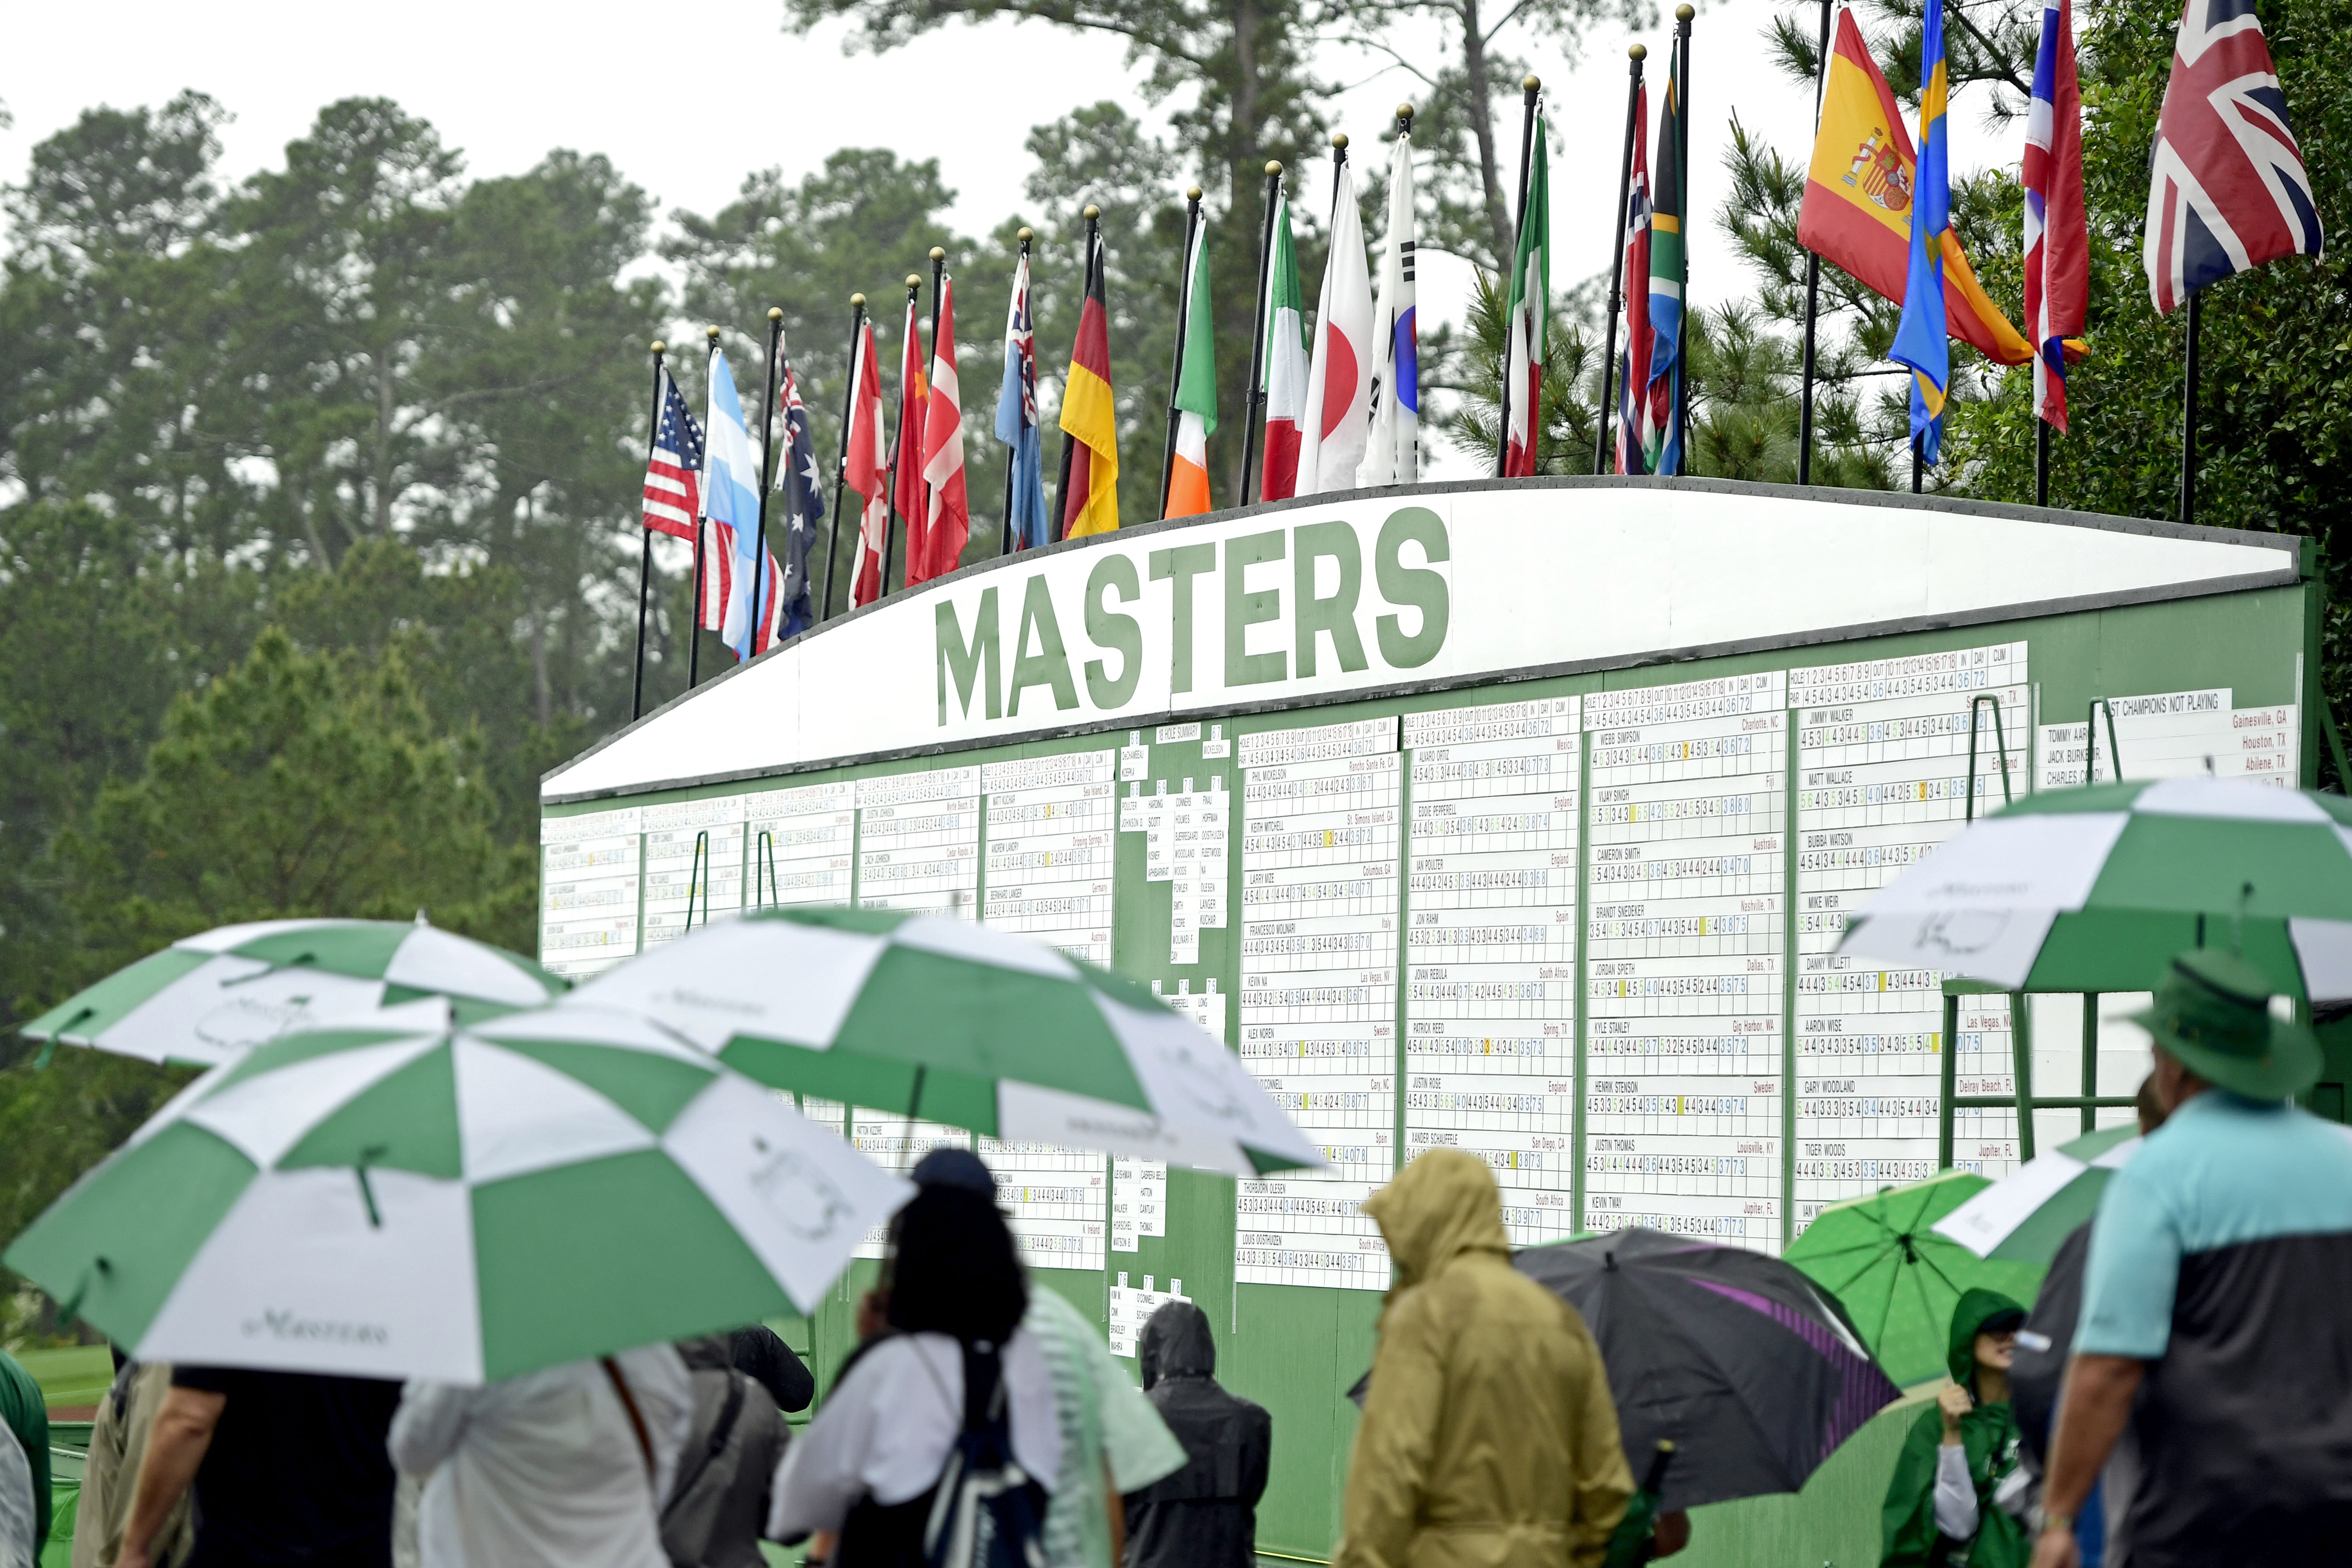 Patrons walk by the the leader board as rain falls during the second round of the Masters at Augusta National Golf Club, Friday, April 12, 2019.